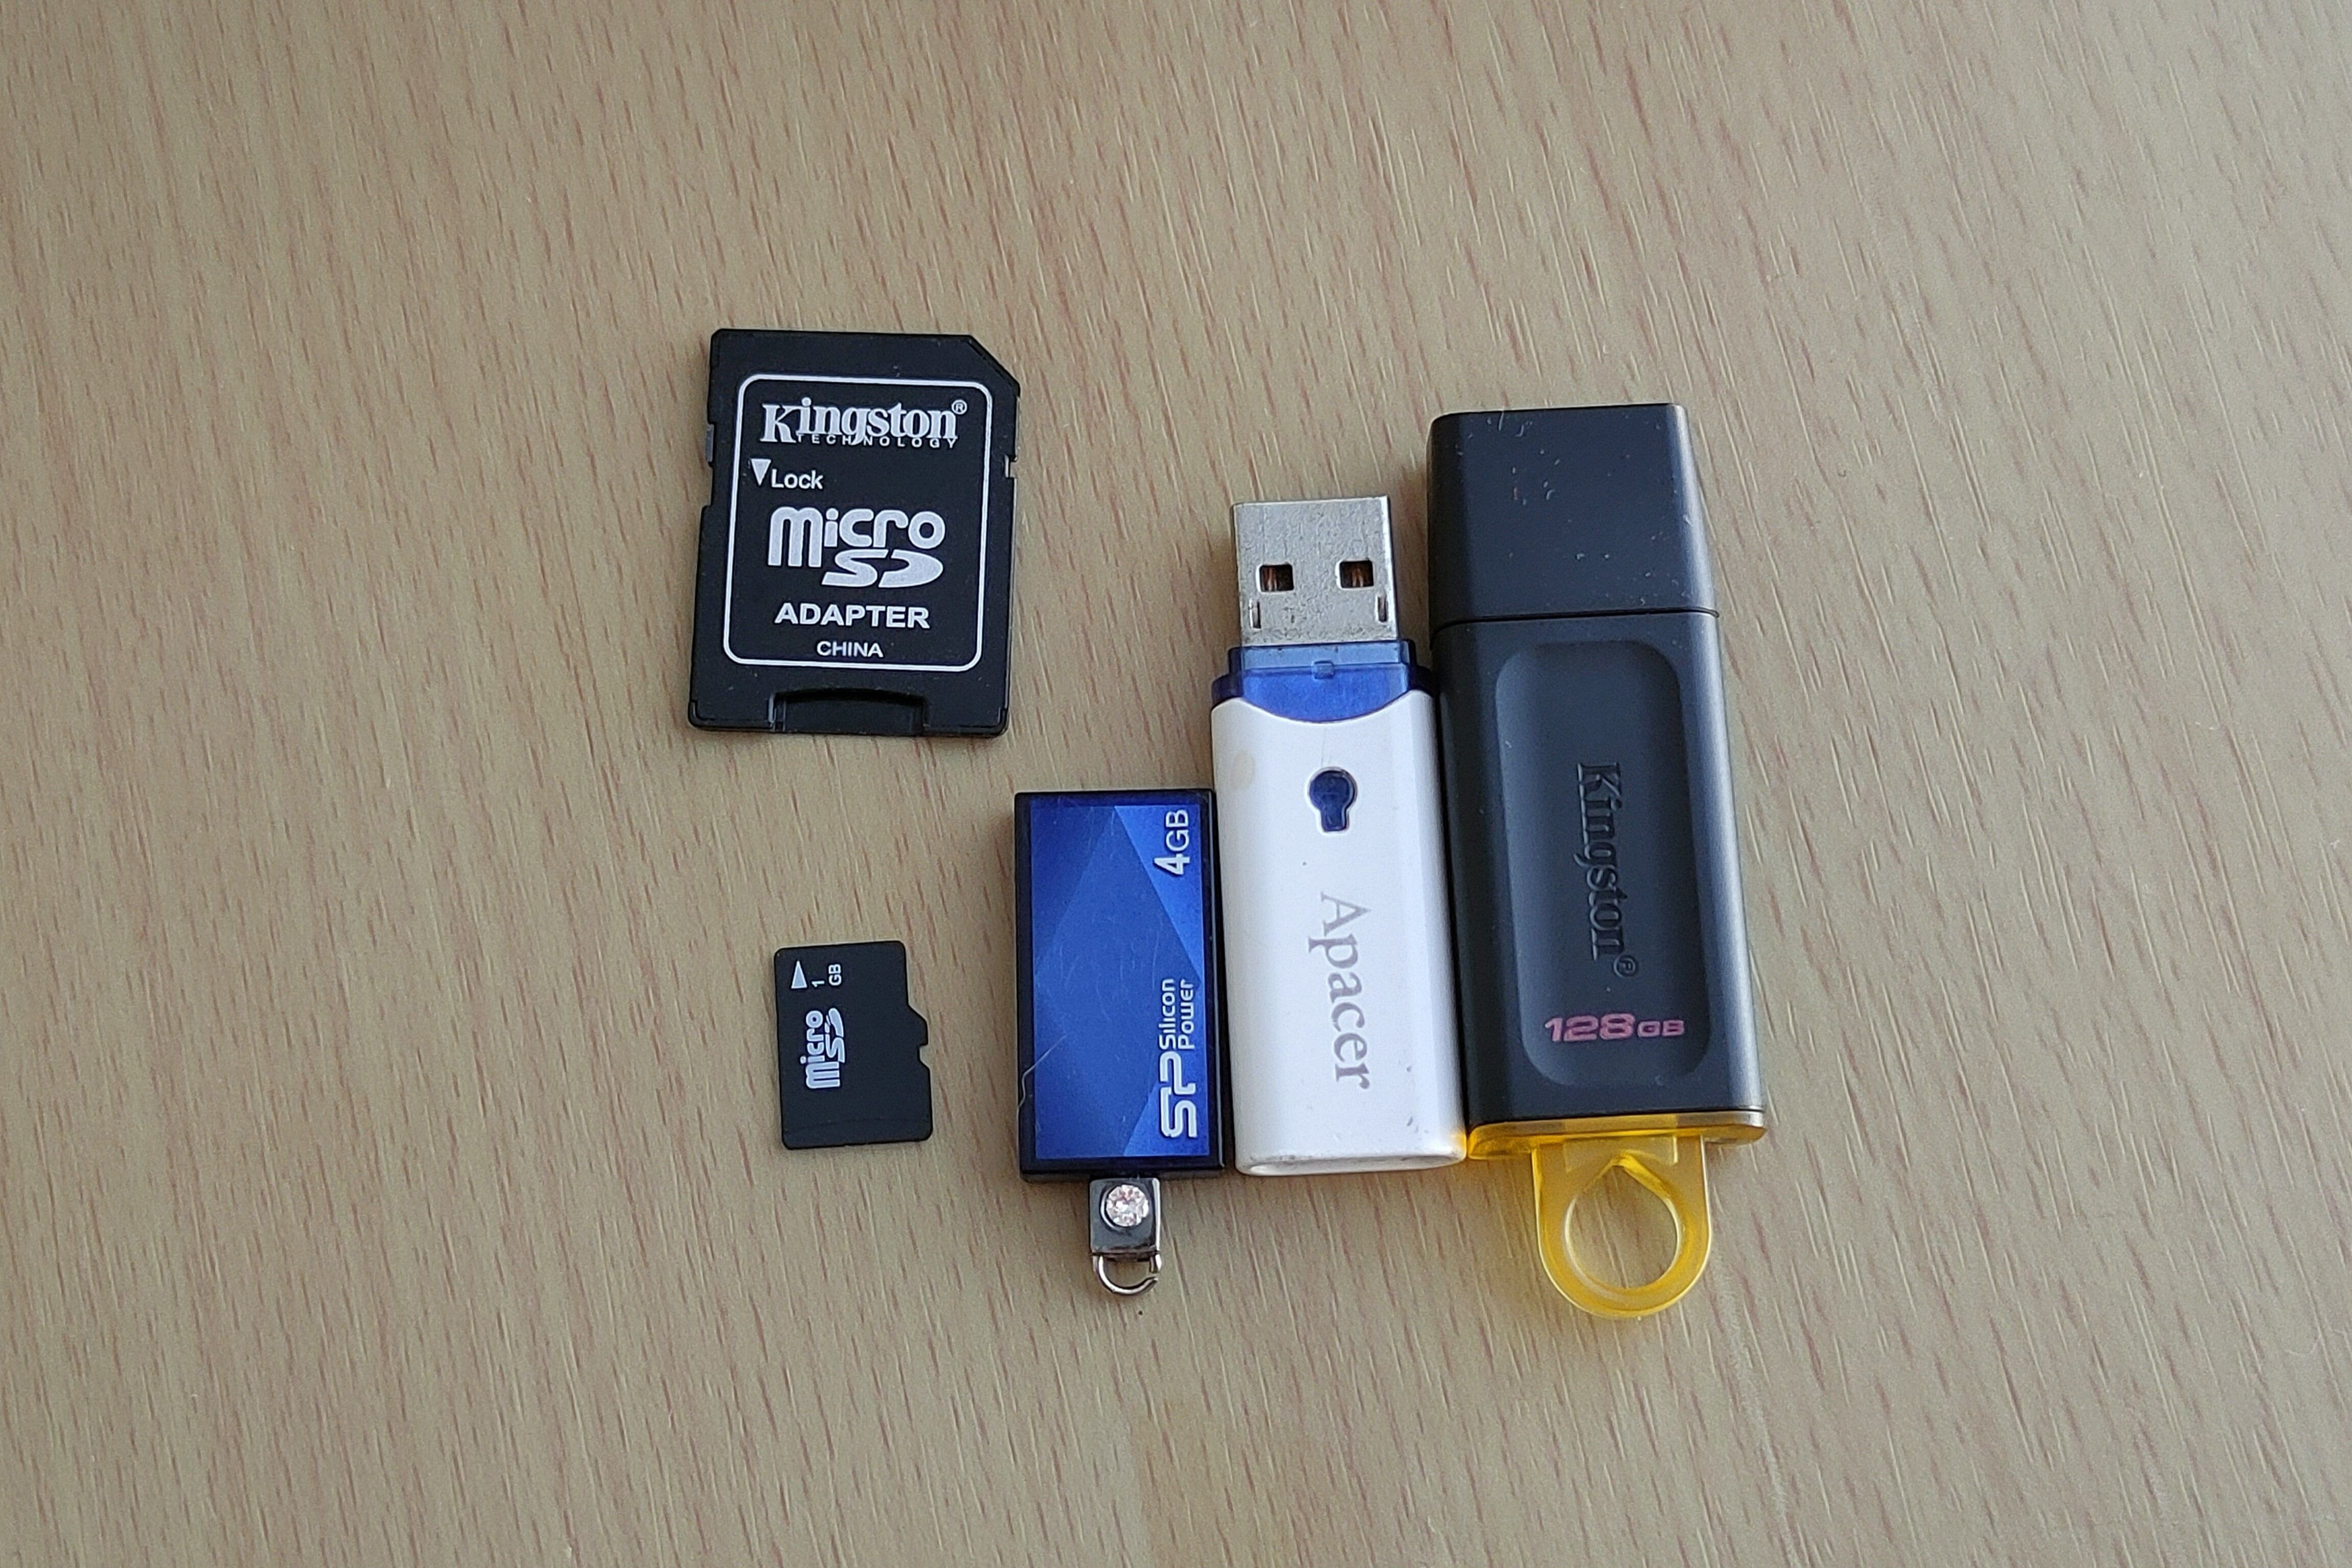 A microSD card and SD card adapter next to three different USB flash drives.